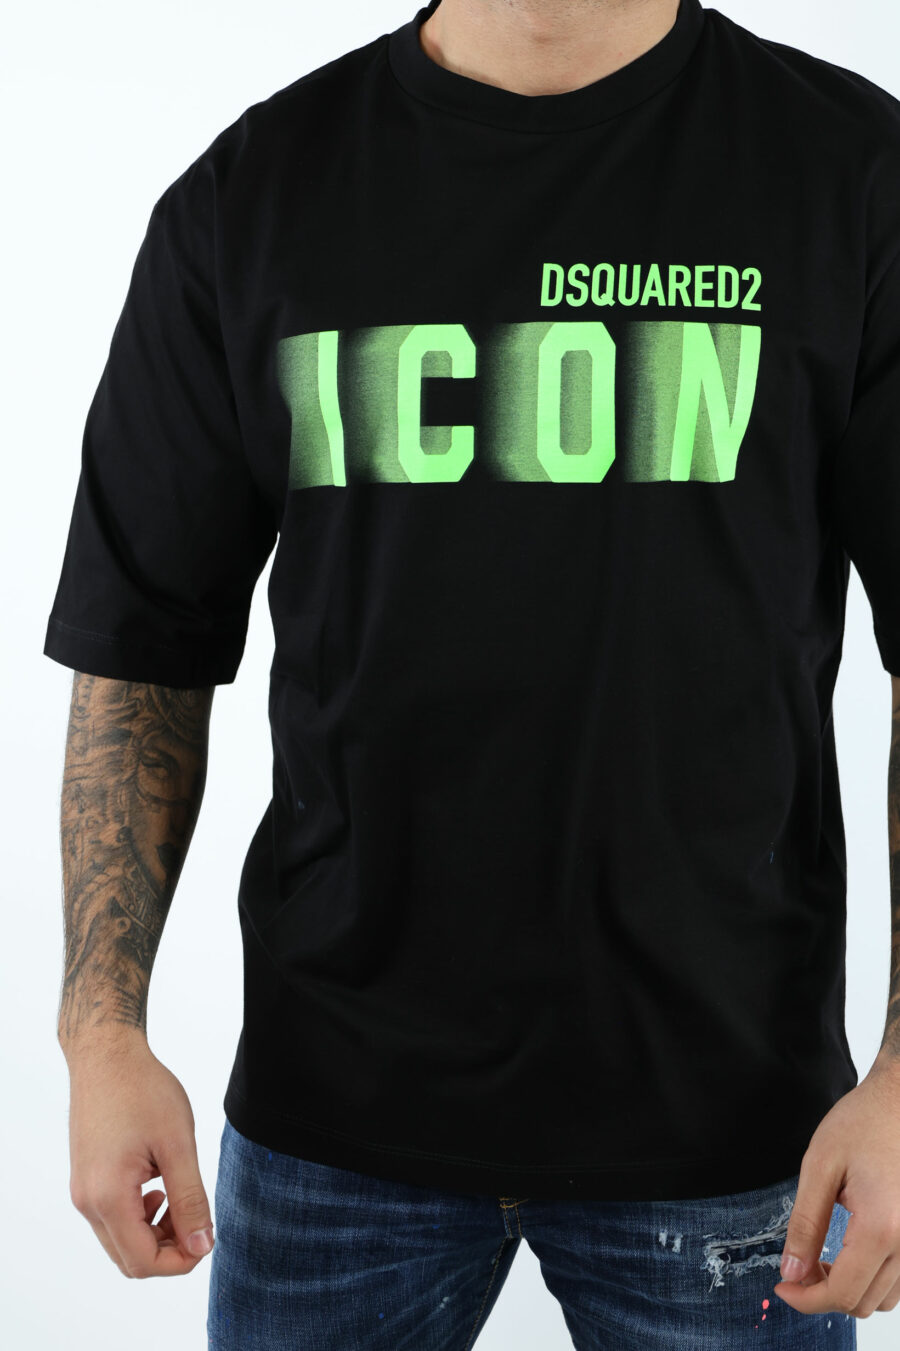 Black oversize T-shirt with neon green blurred "icon" maxilogo - 106933